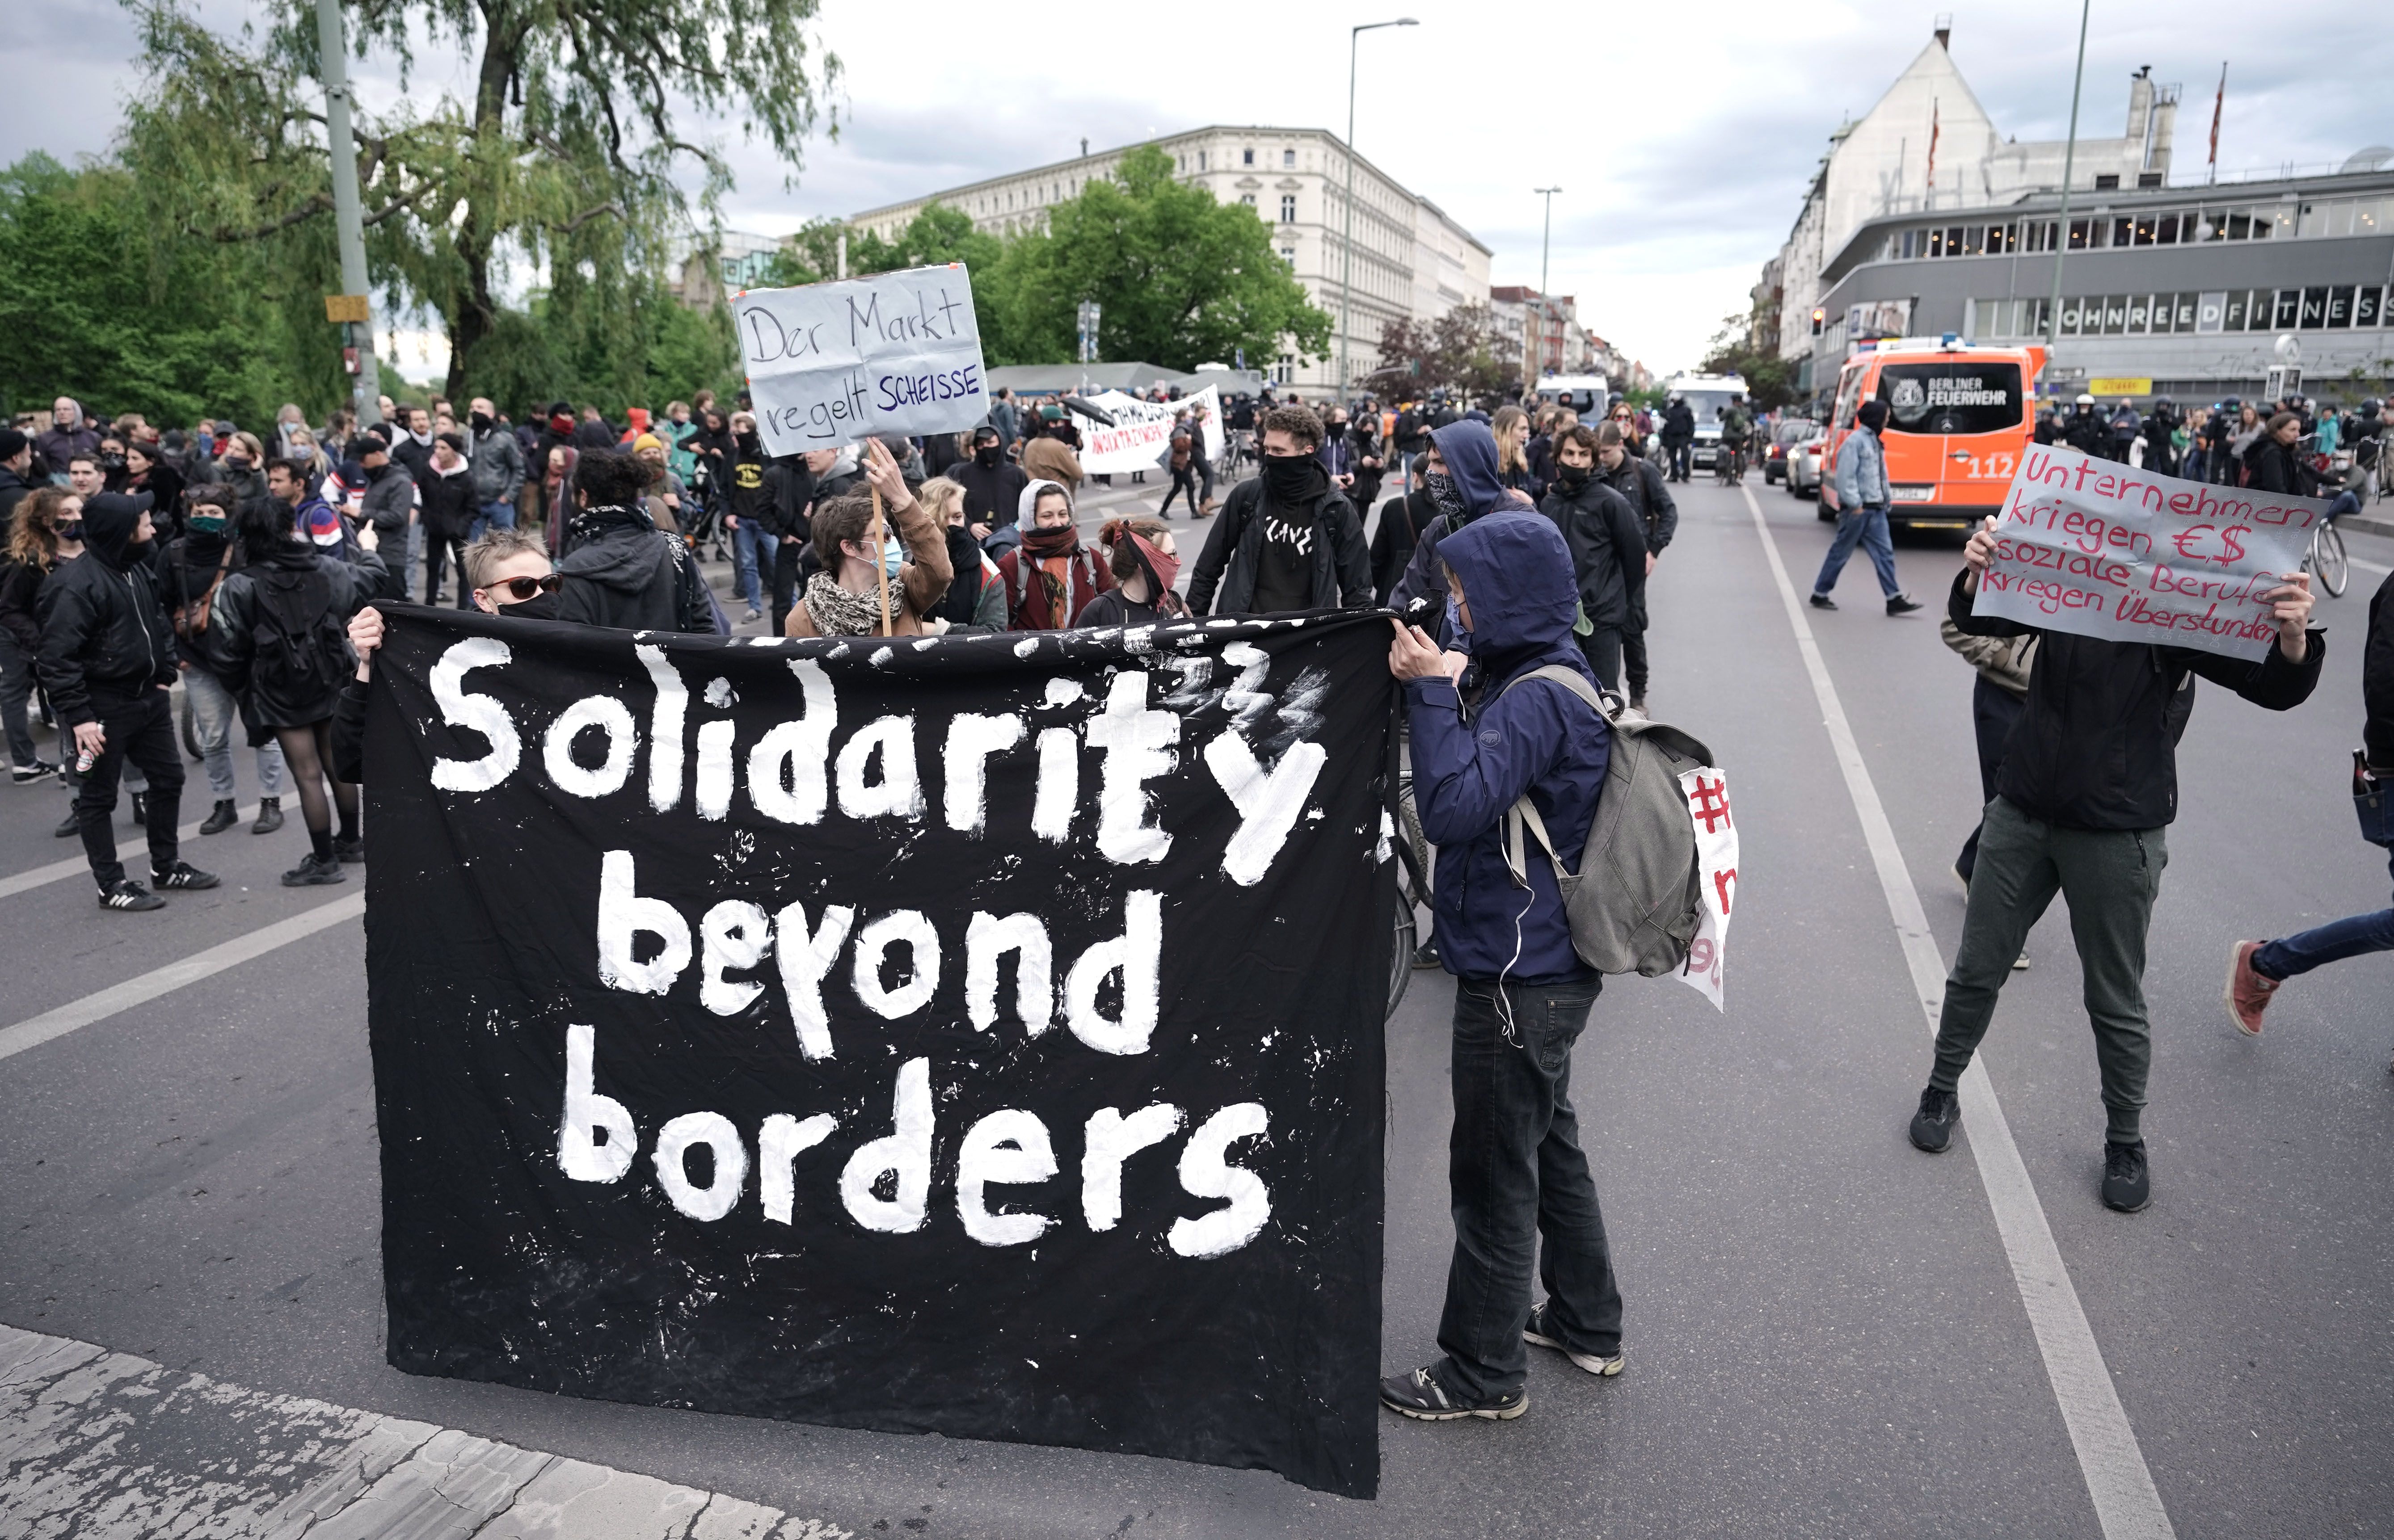 In t his image, a large banner sign reads "solidarity beyond borders"